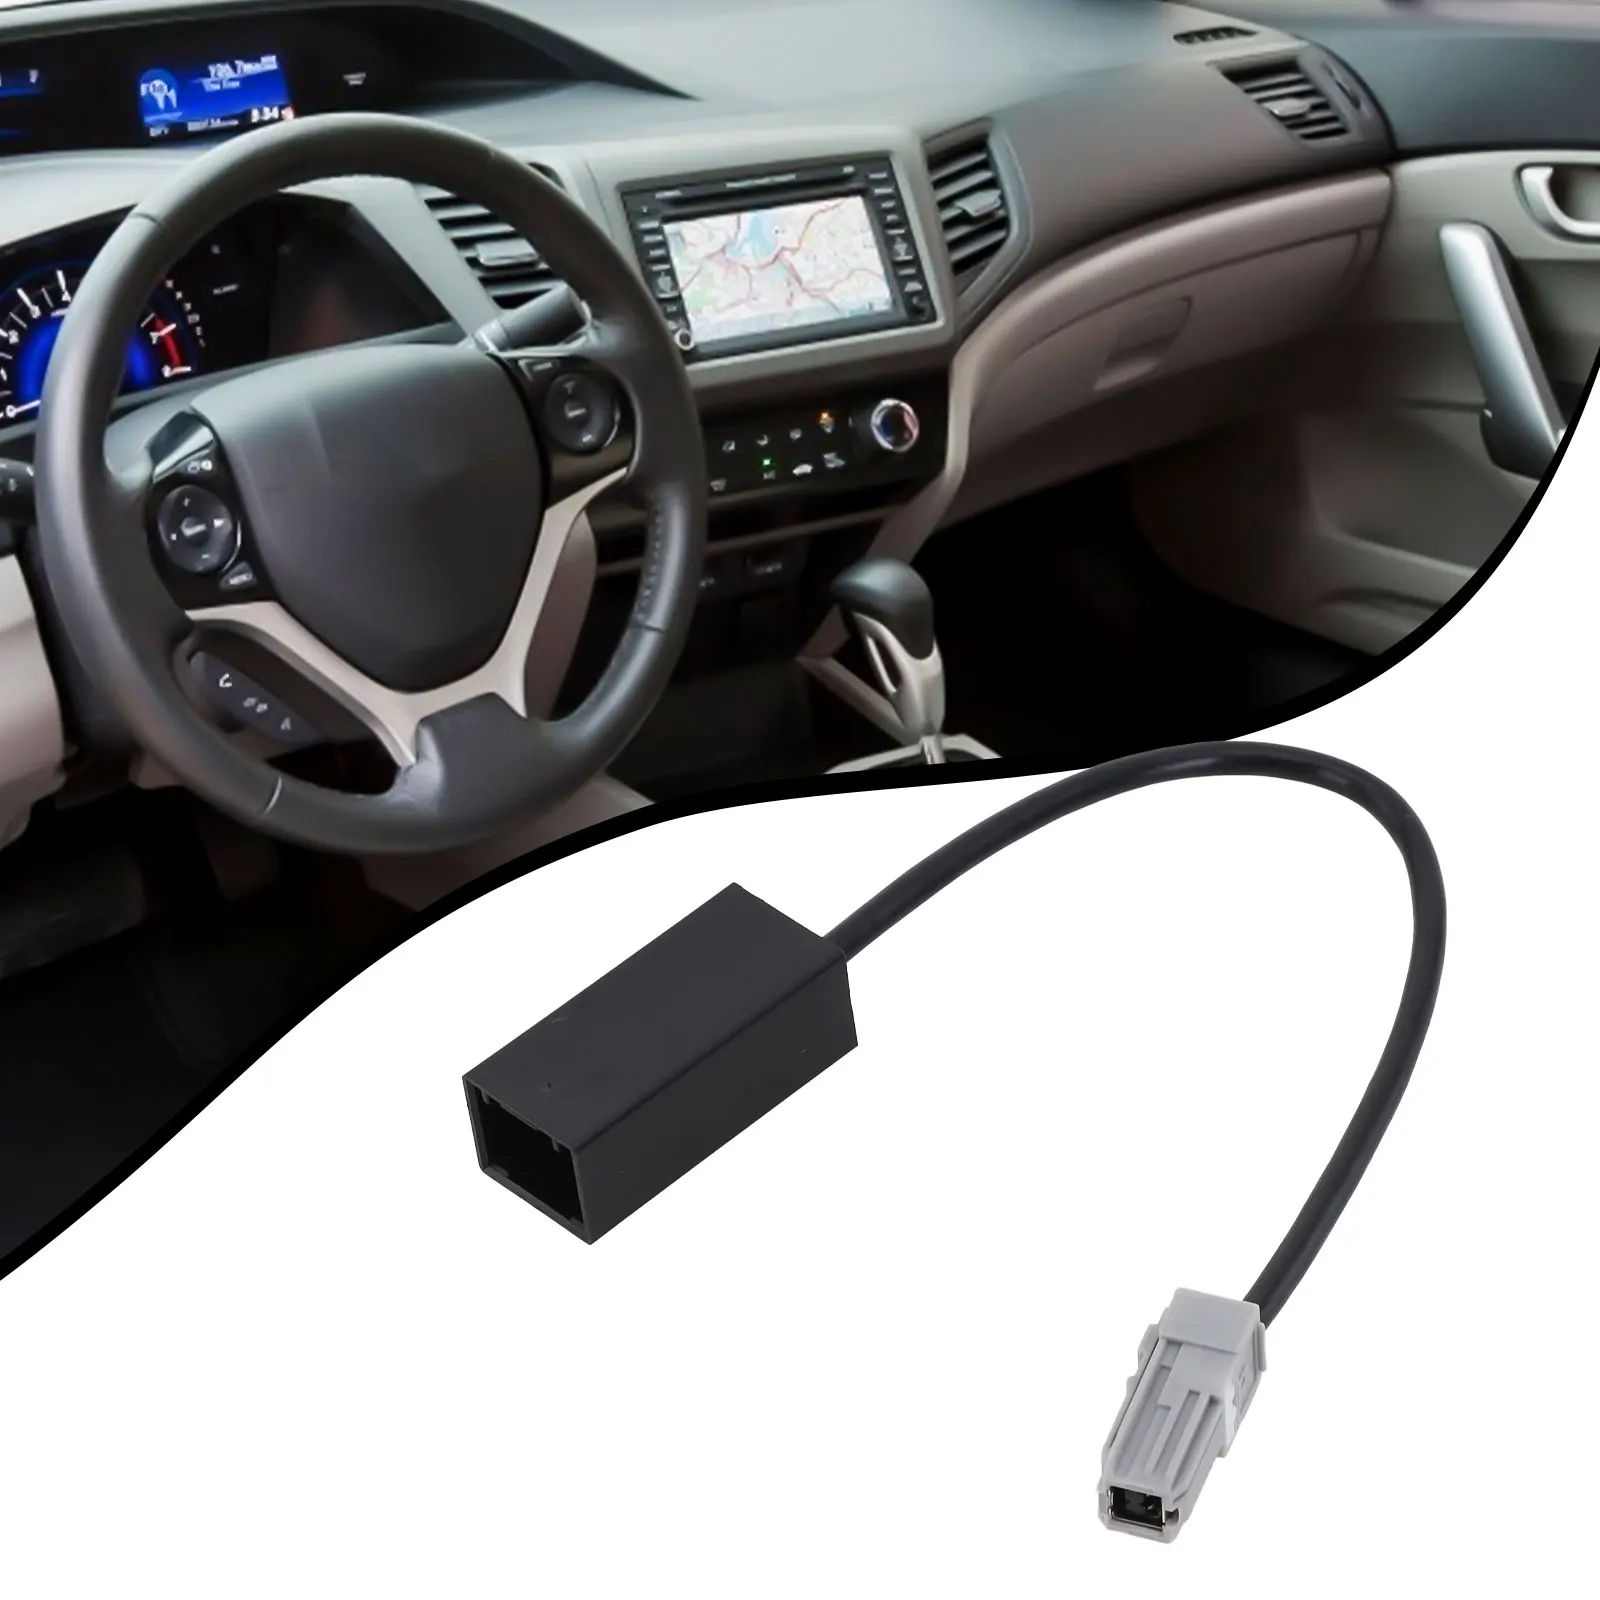 

1pc Auto 15cm Radio USB Male To Female Adapter Cable With USB Plug Fit For Honda Black ABS Vehicle Electronics Accessories